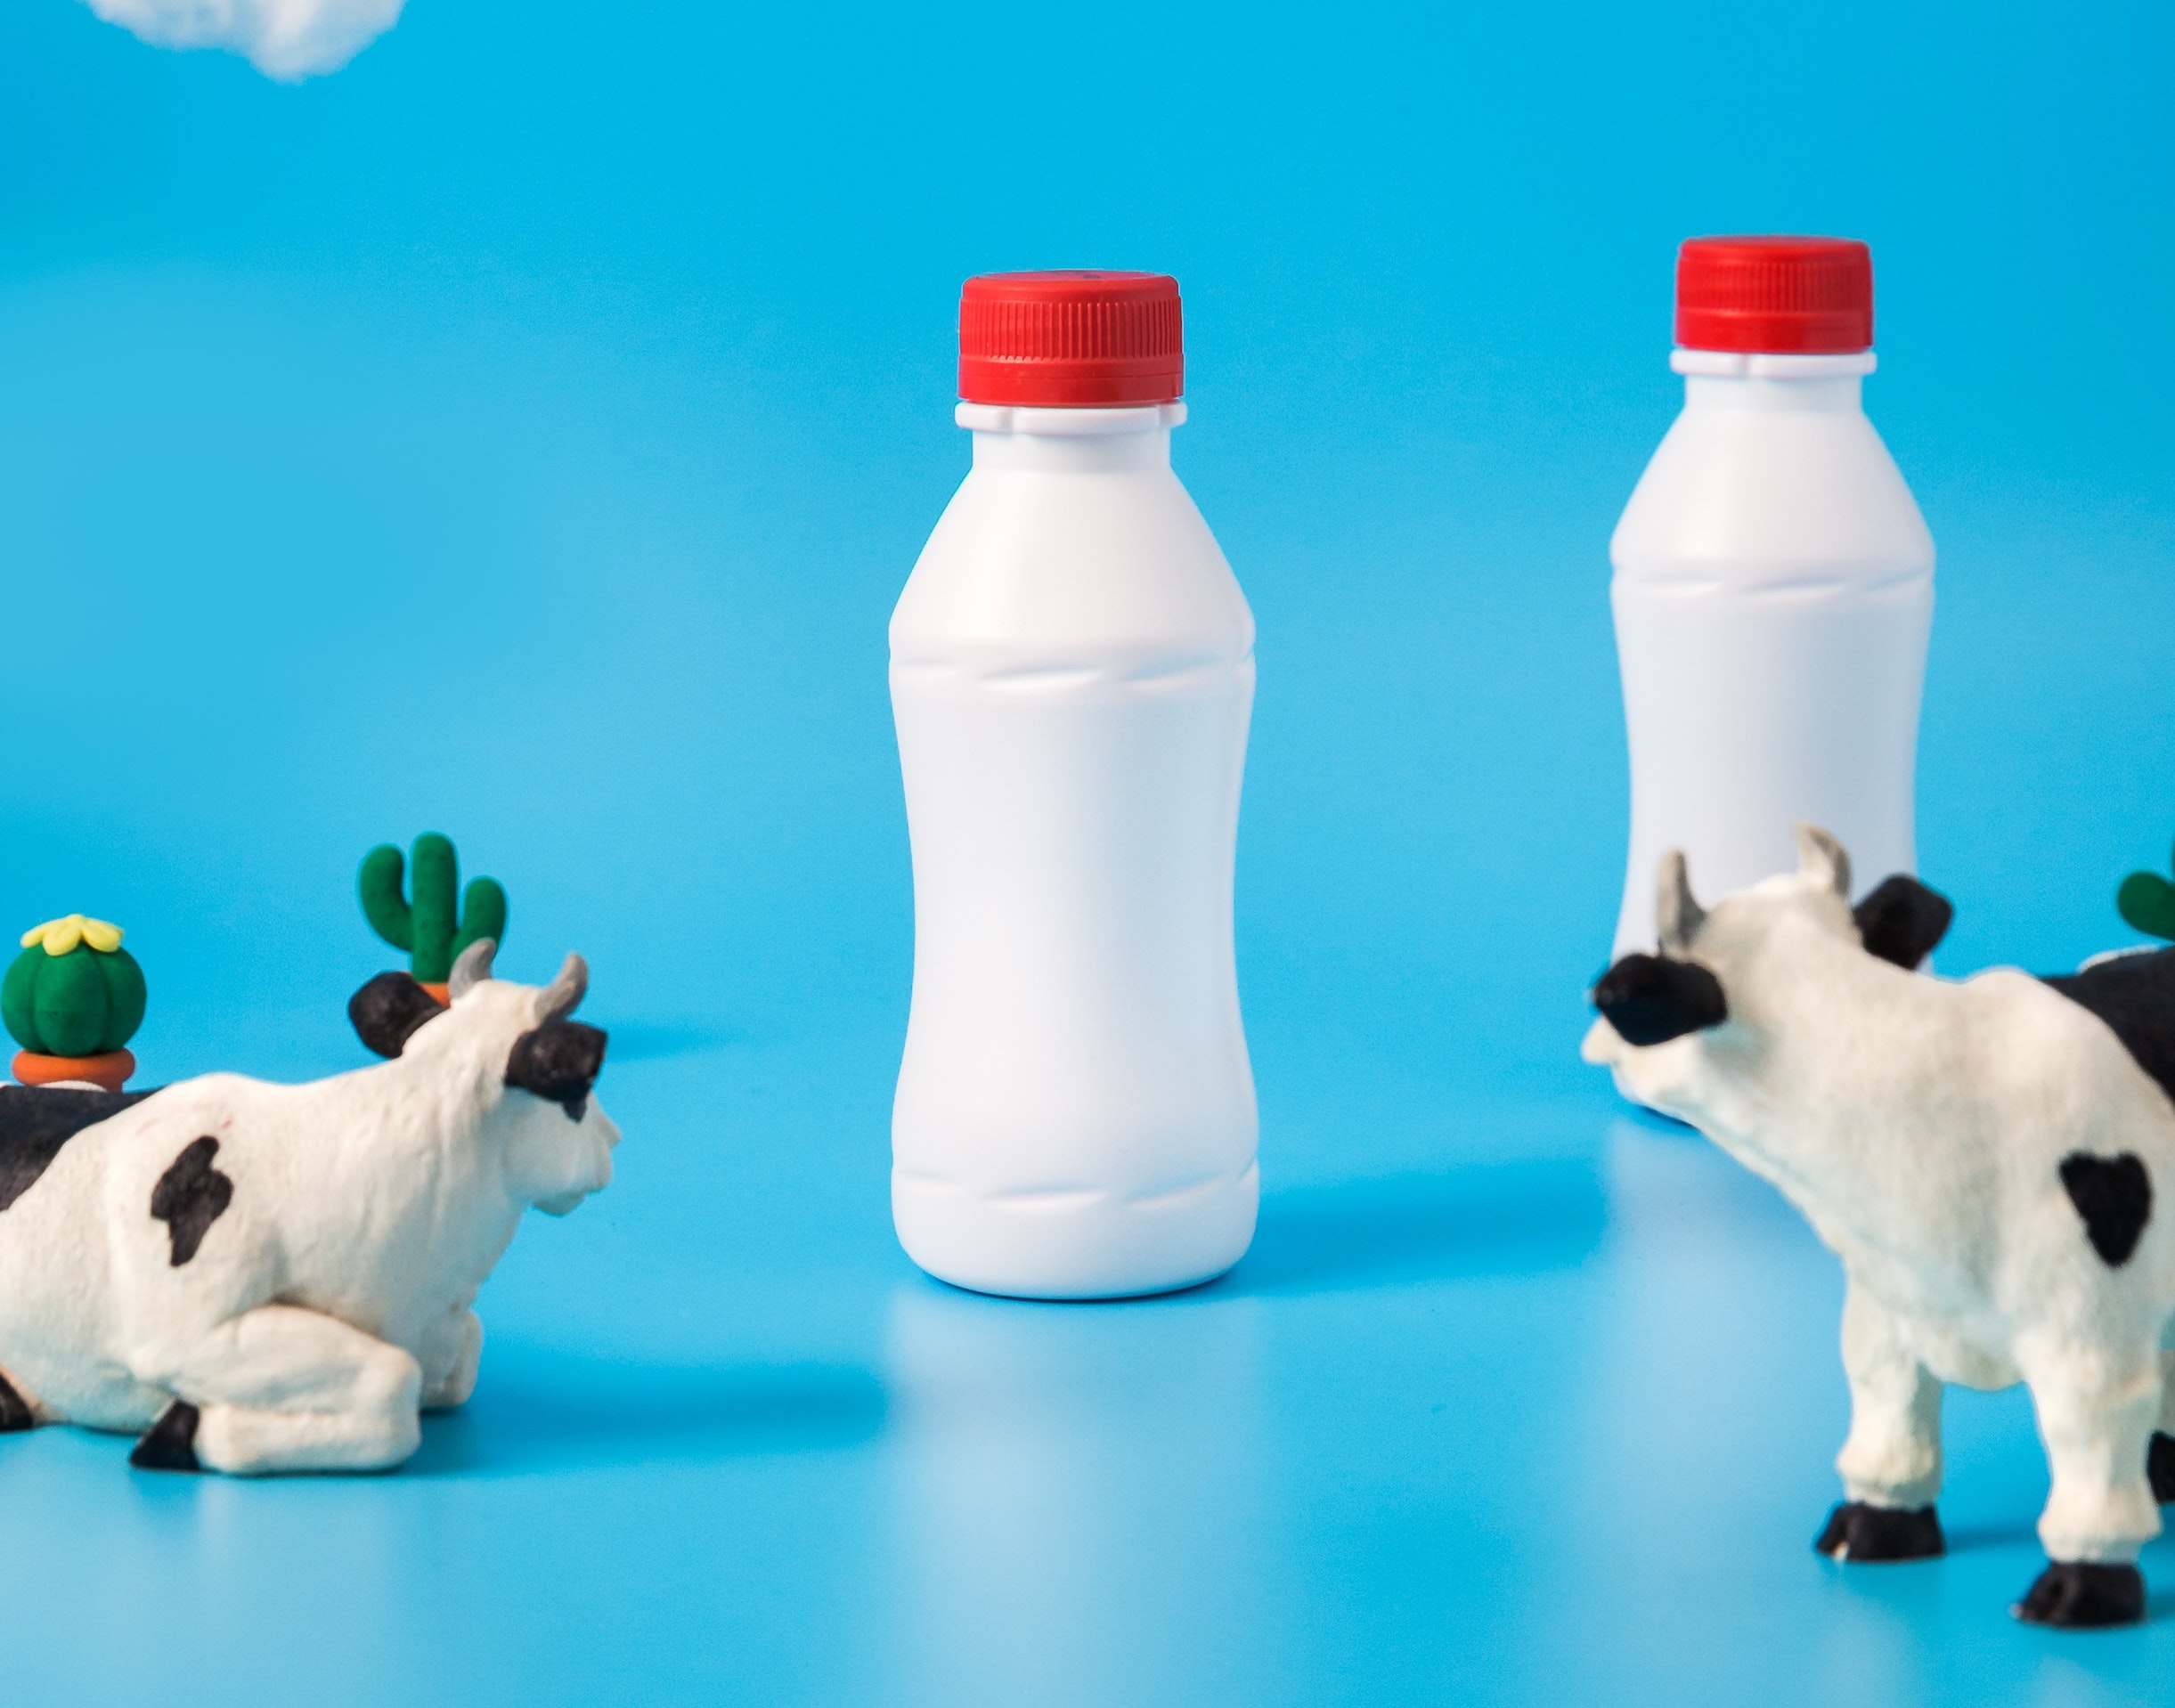 How to Find the Best Dairy Distributor for your Business